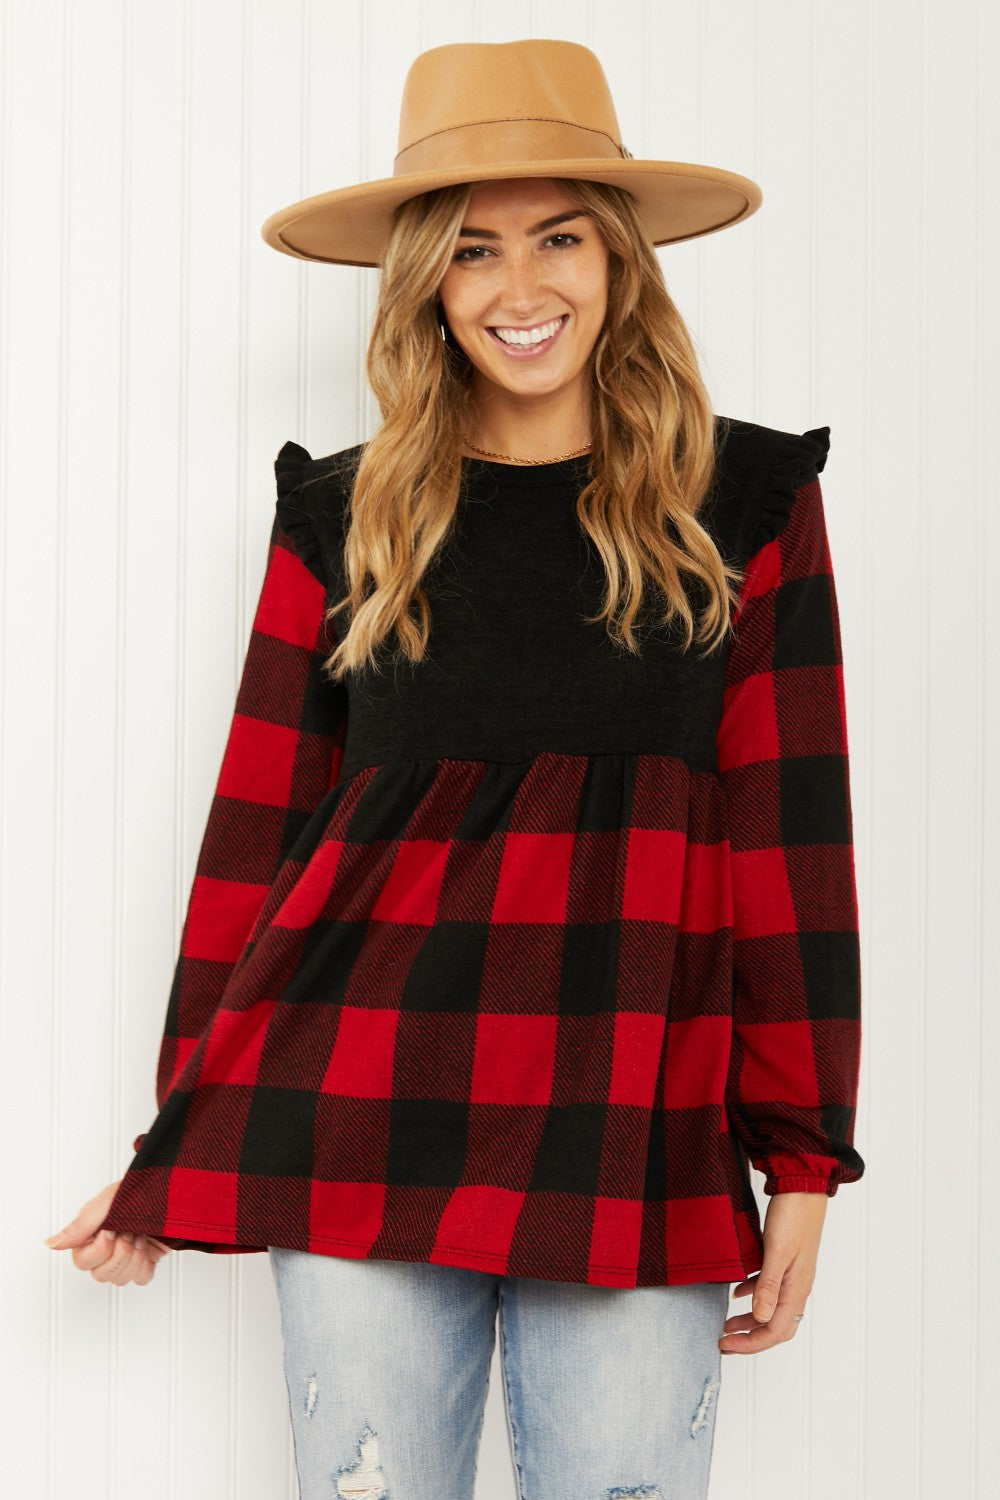 Heimish Full Size Plaid Contrast Ruffle Shoulder Babydoll Top in Black/Red